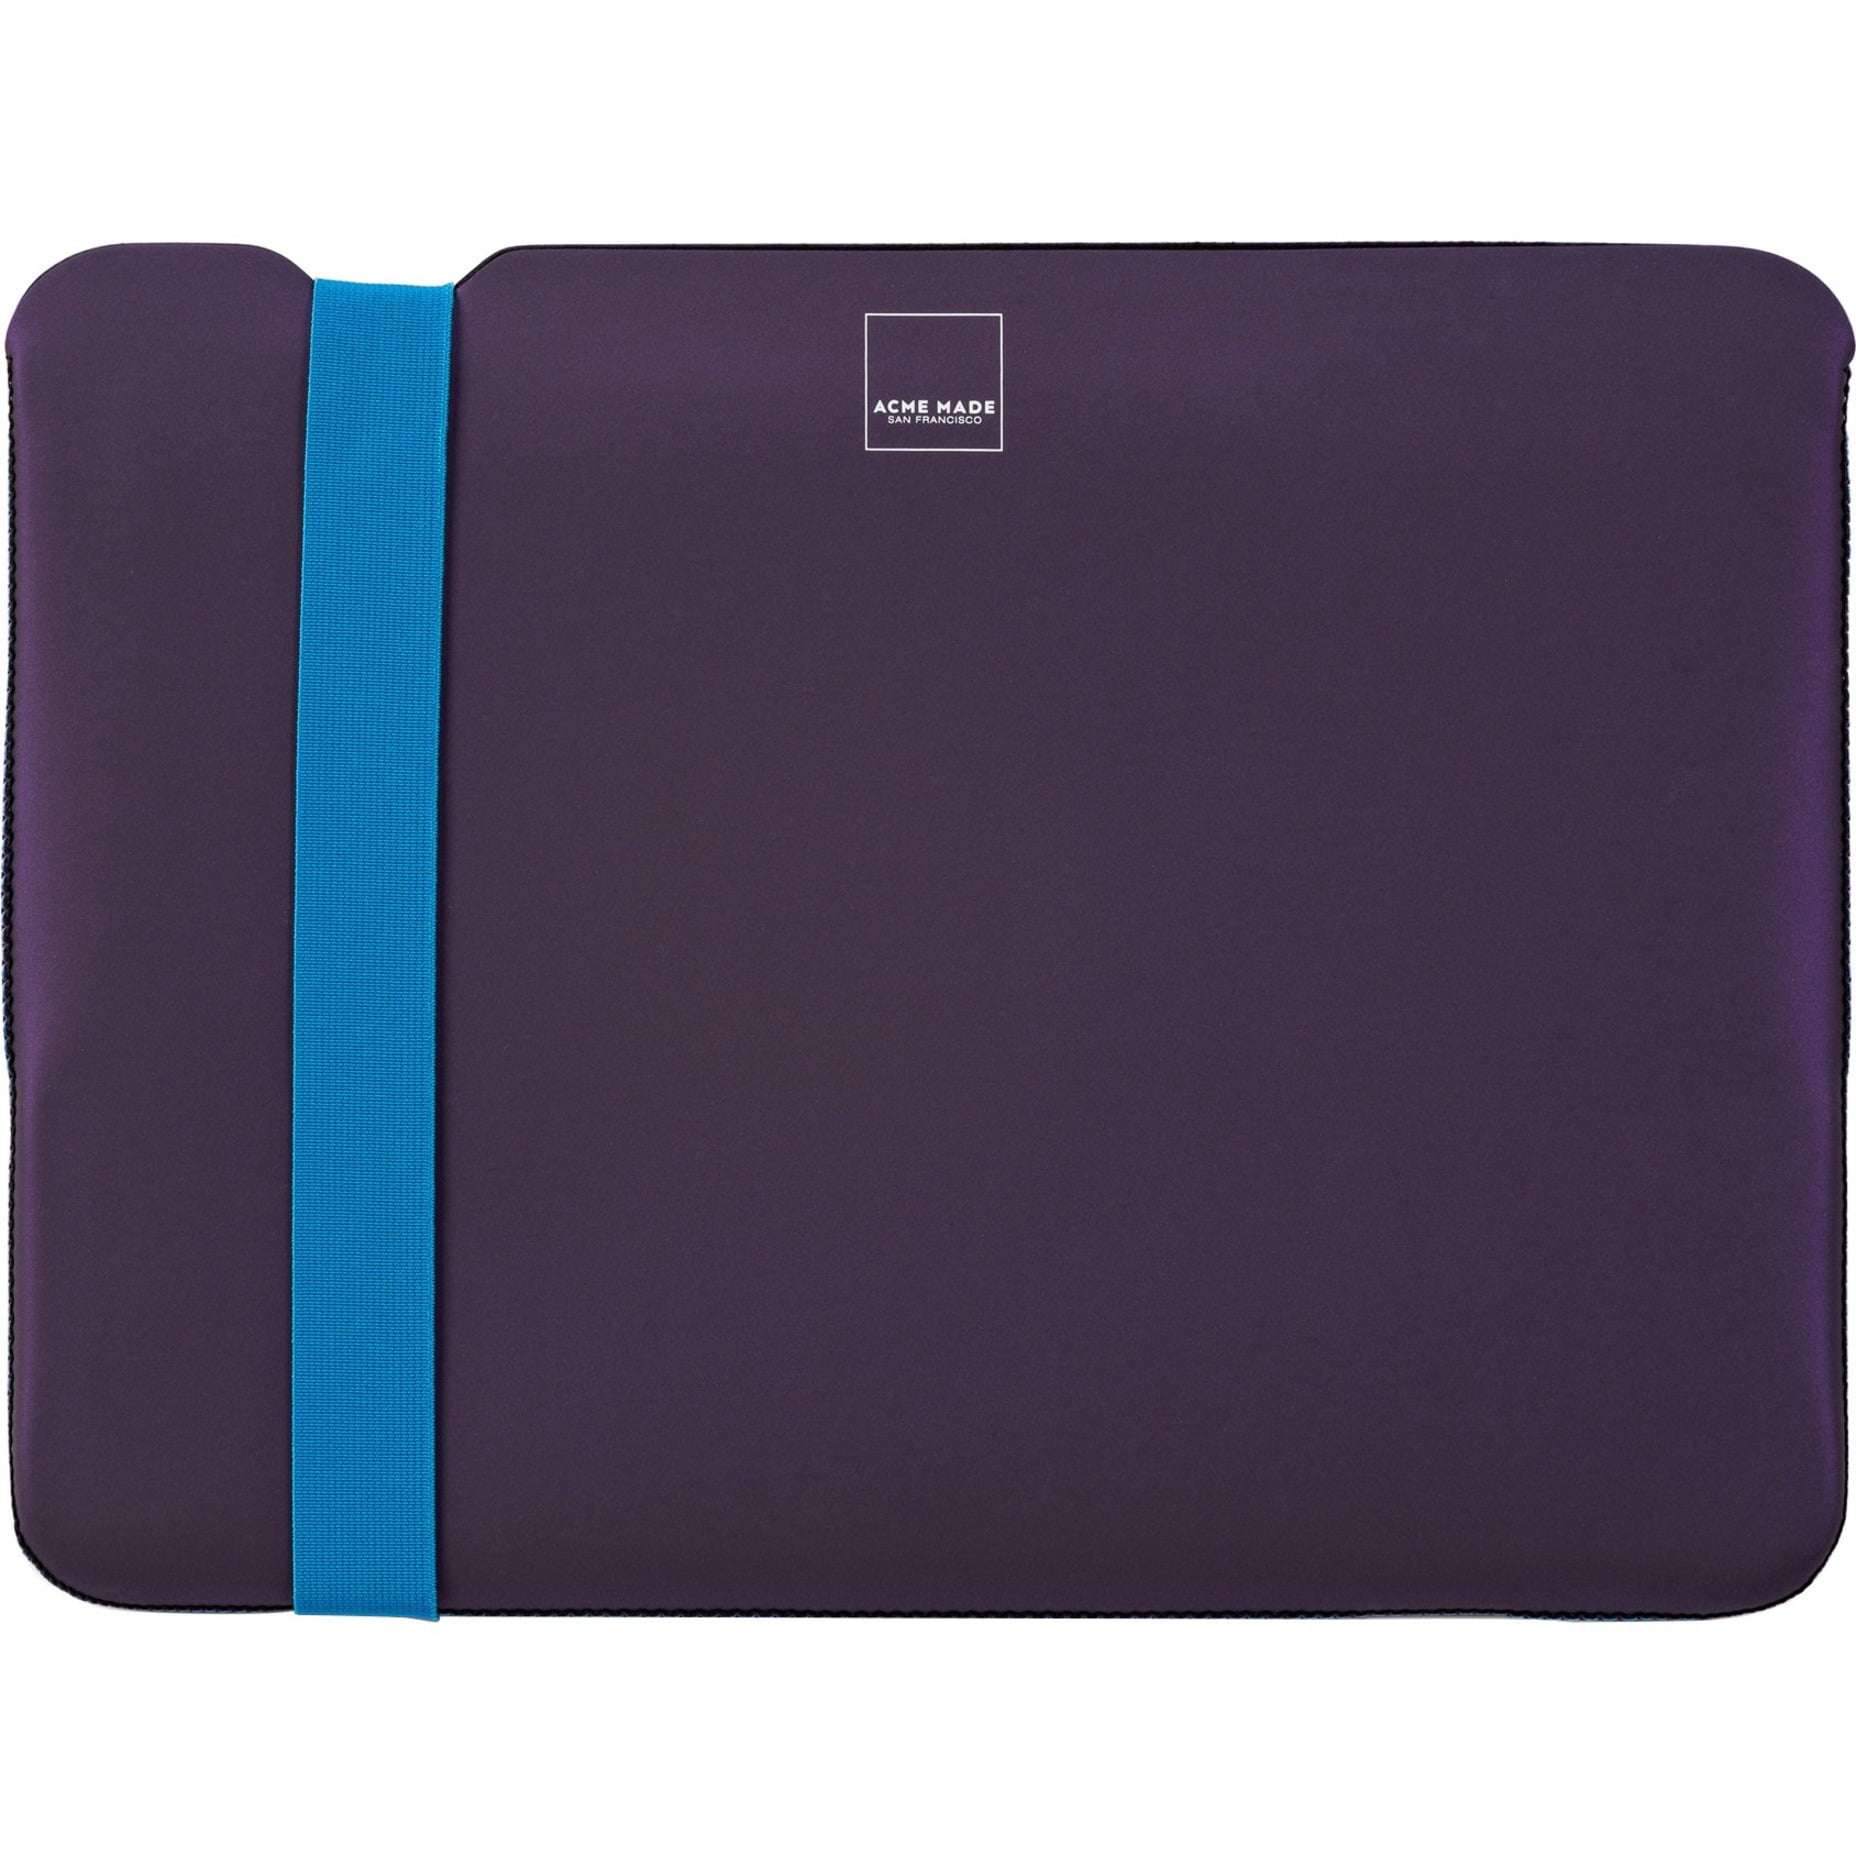 ACME Made Designer Laptop Bag/Sleeve For MacBook Pro 15" or less With Strap 